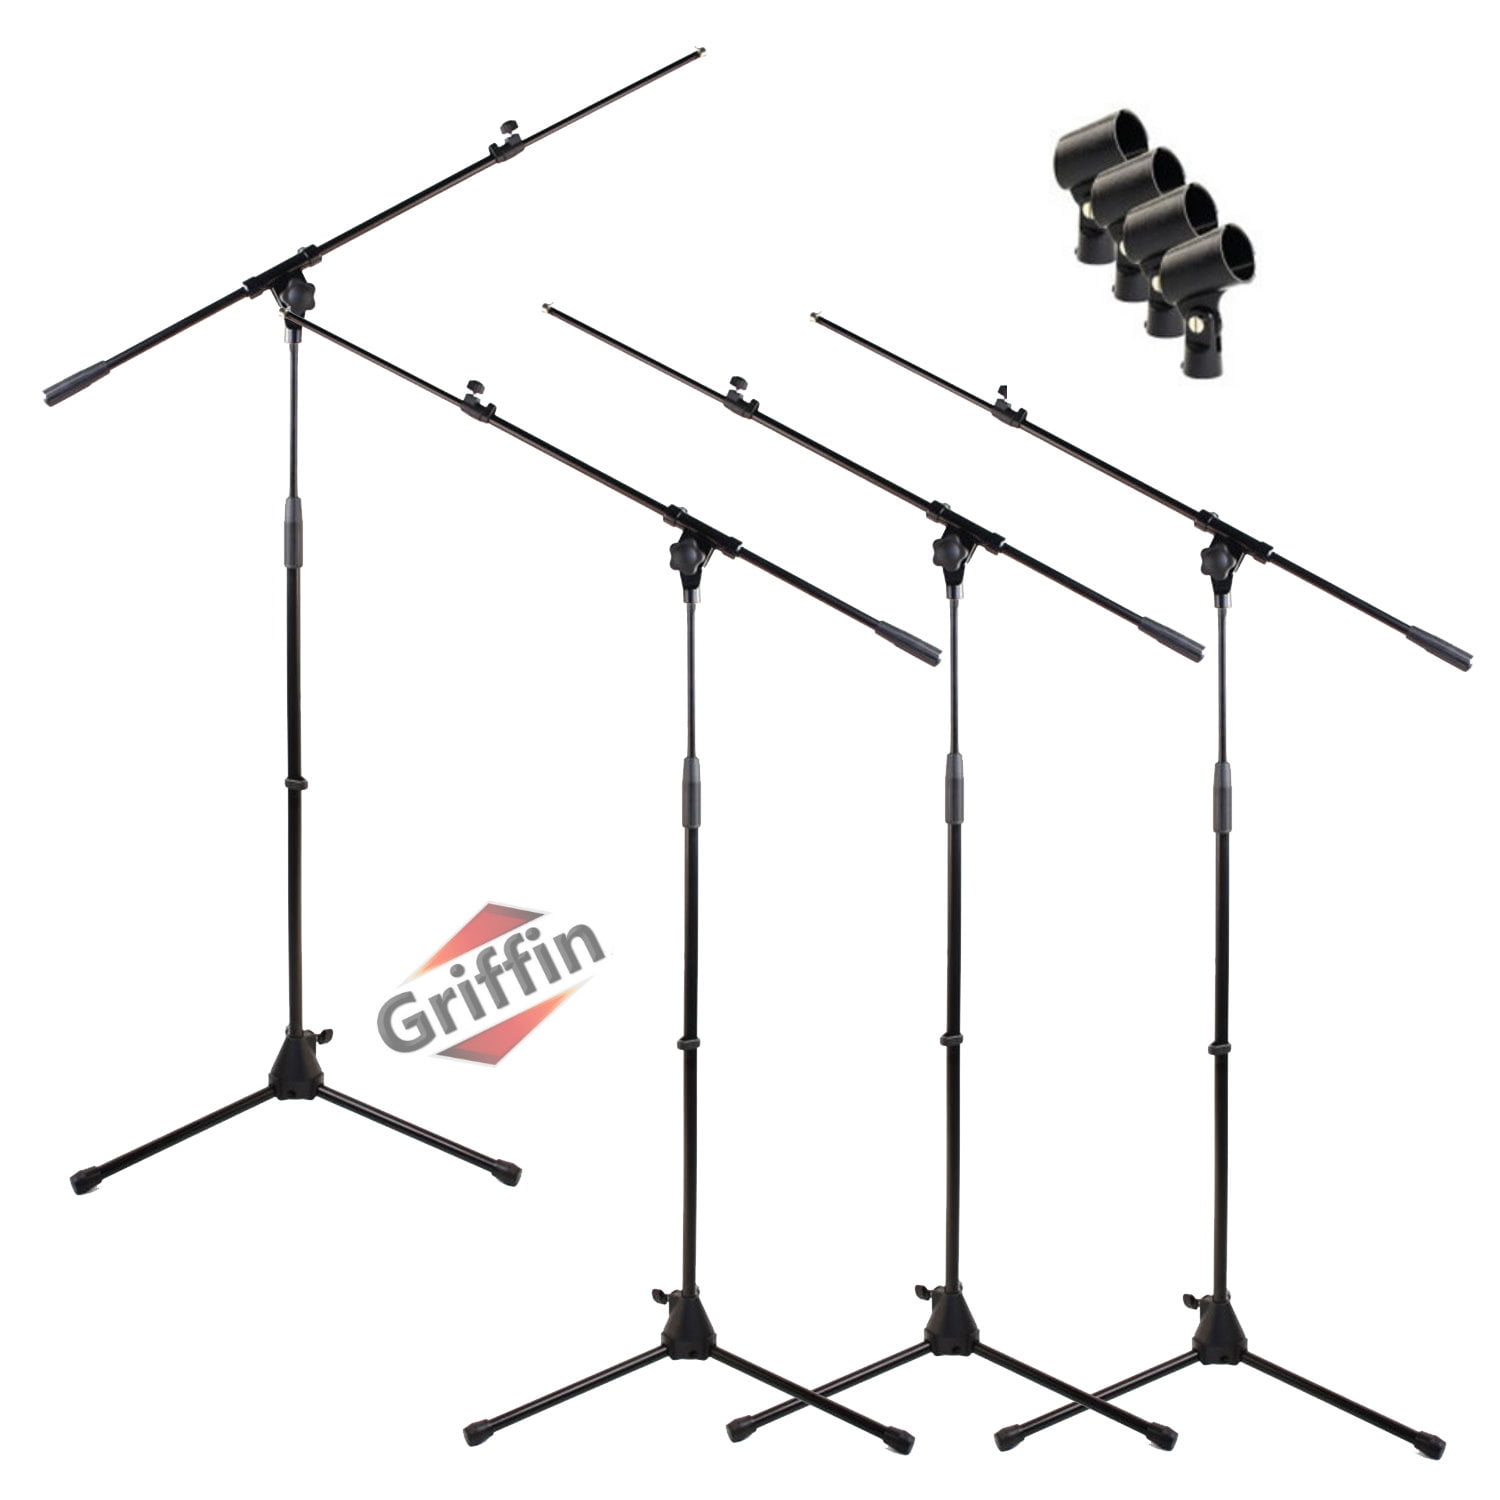 Microphone Boom Stand with Mic Clip Adapter (Pack of 6) by GRIFFIN  Adjustable Holder Mount For Studio Recording Accessories, Singing Vocal  Karaoke,